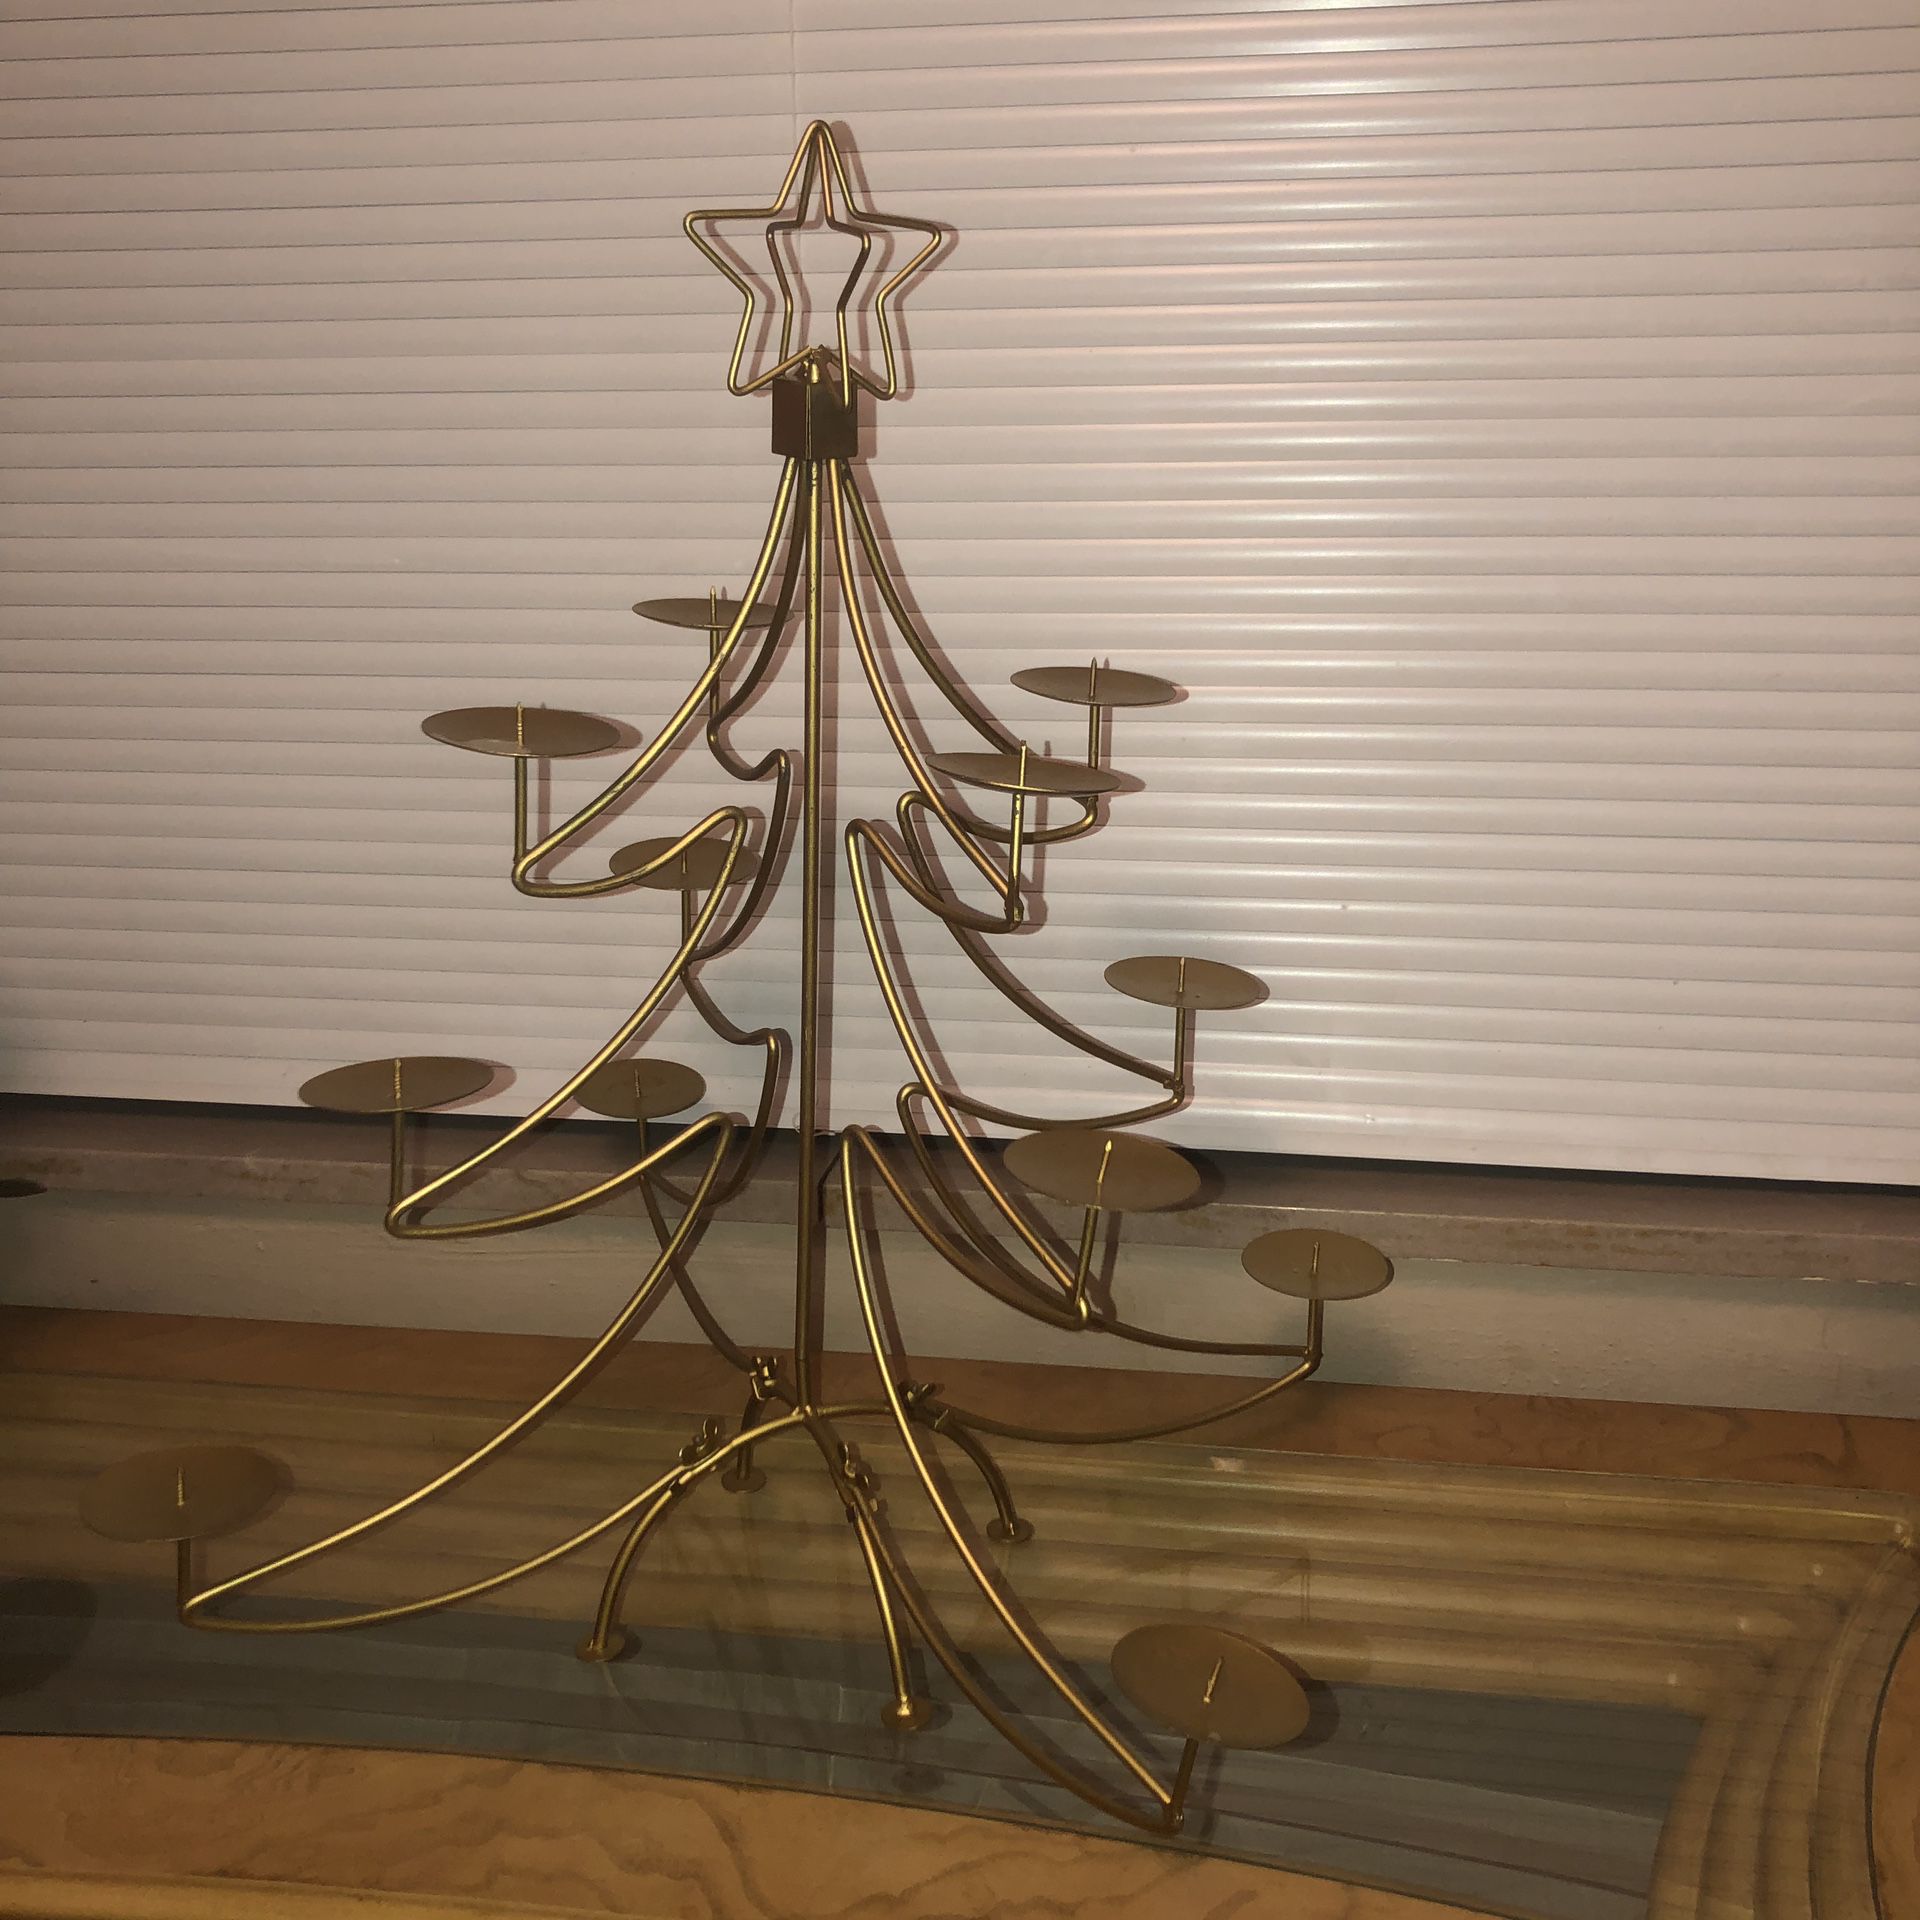 Golden metal Christmas tree candle holder decoration that comes apart for storage 20”x23”